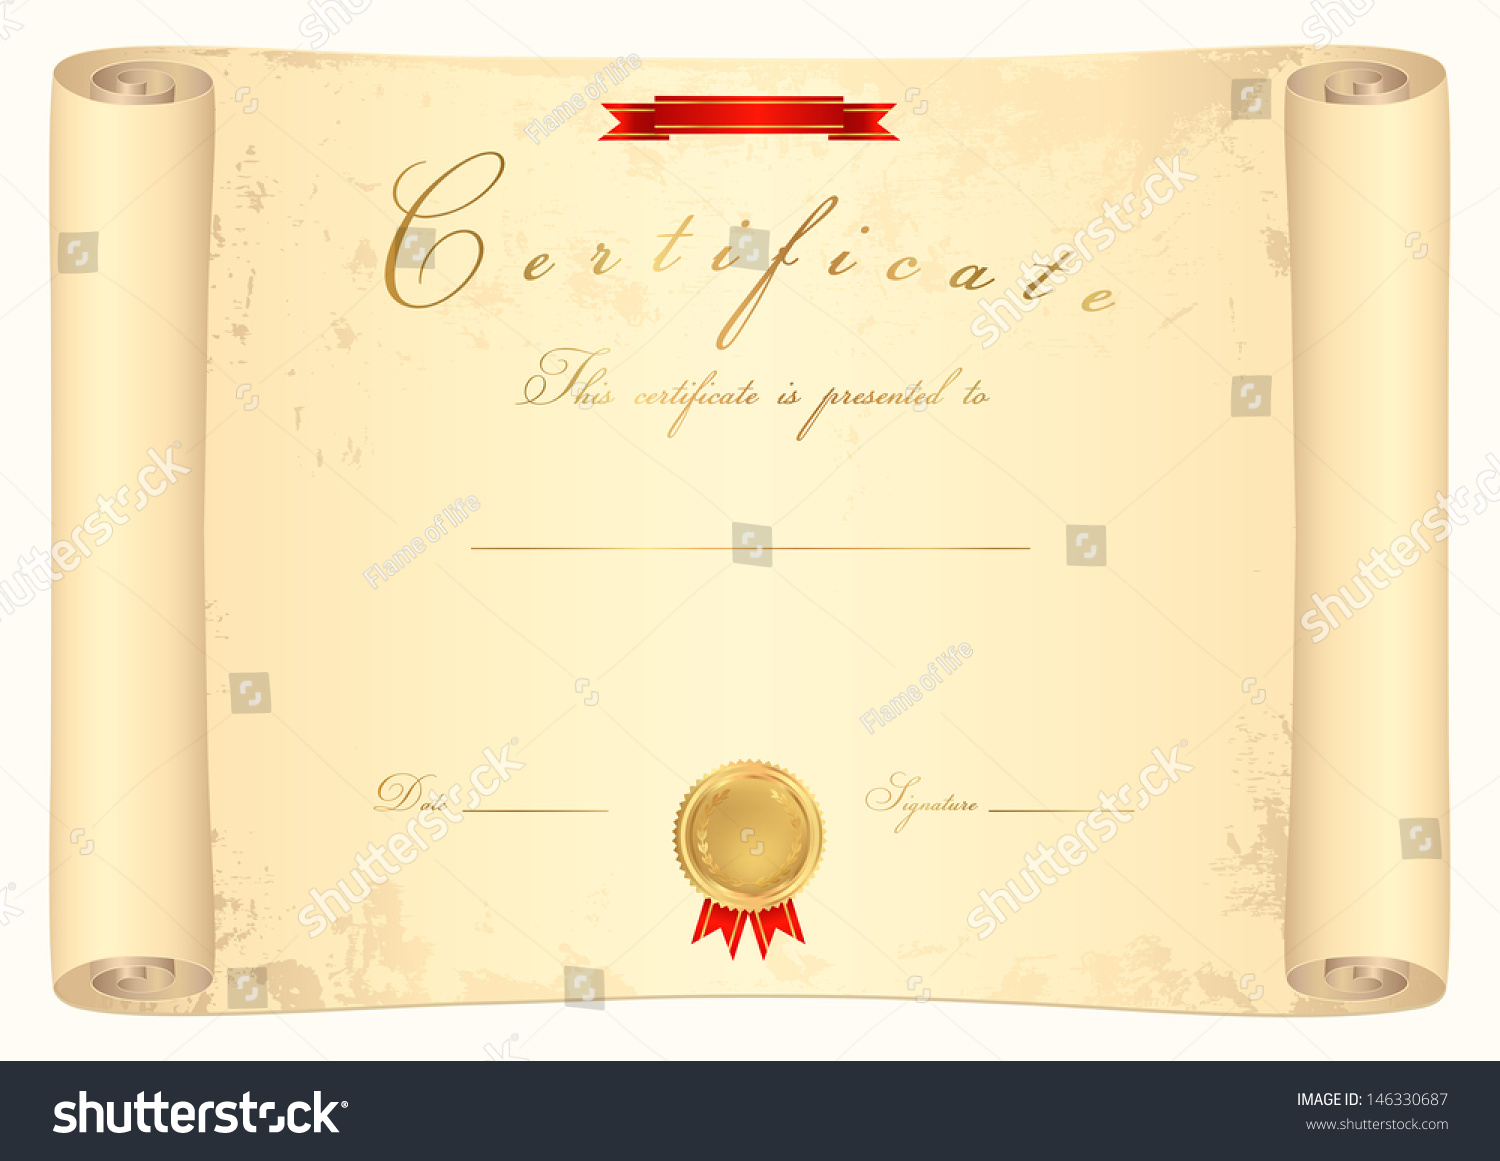 Scroll Certificate Completion Template Sample Background Stock  Throughout Scroll Certificate Templates